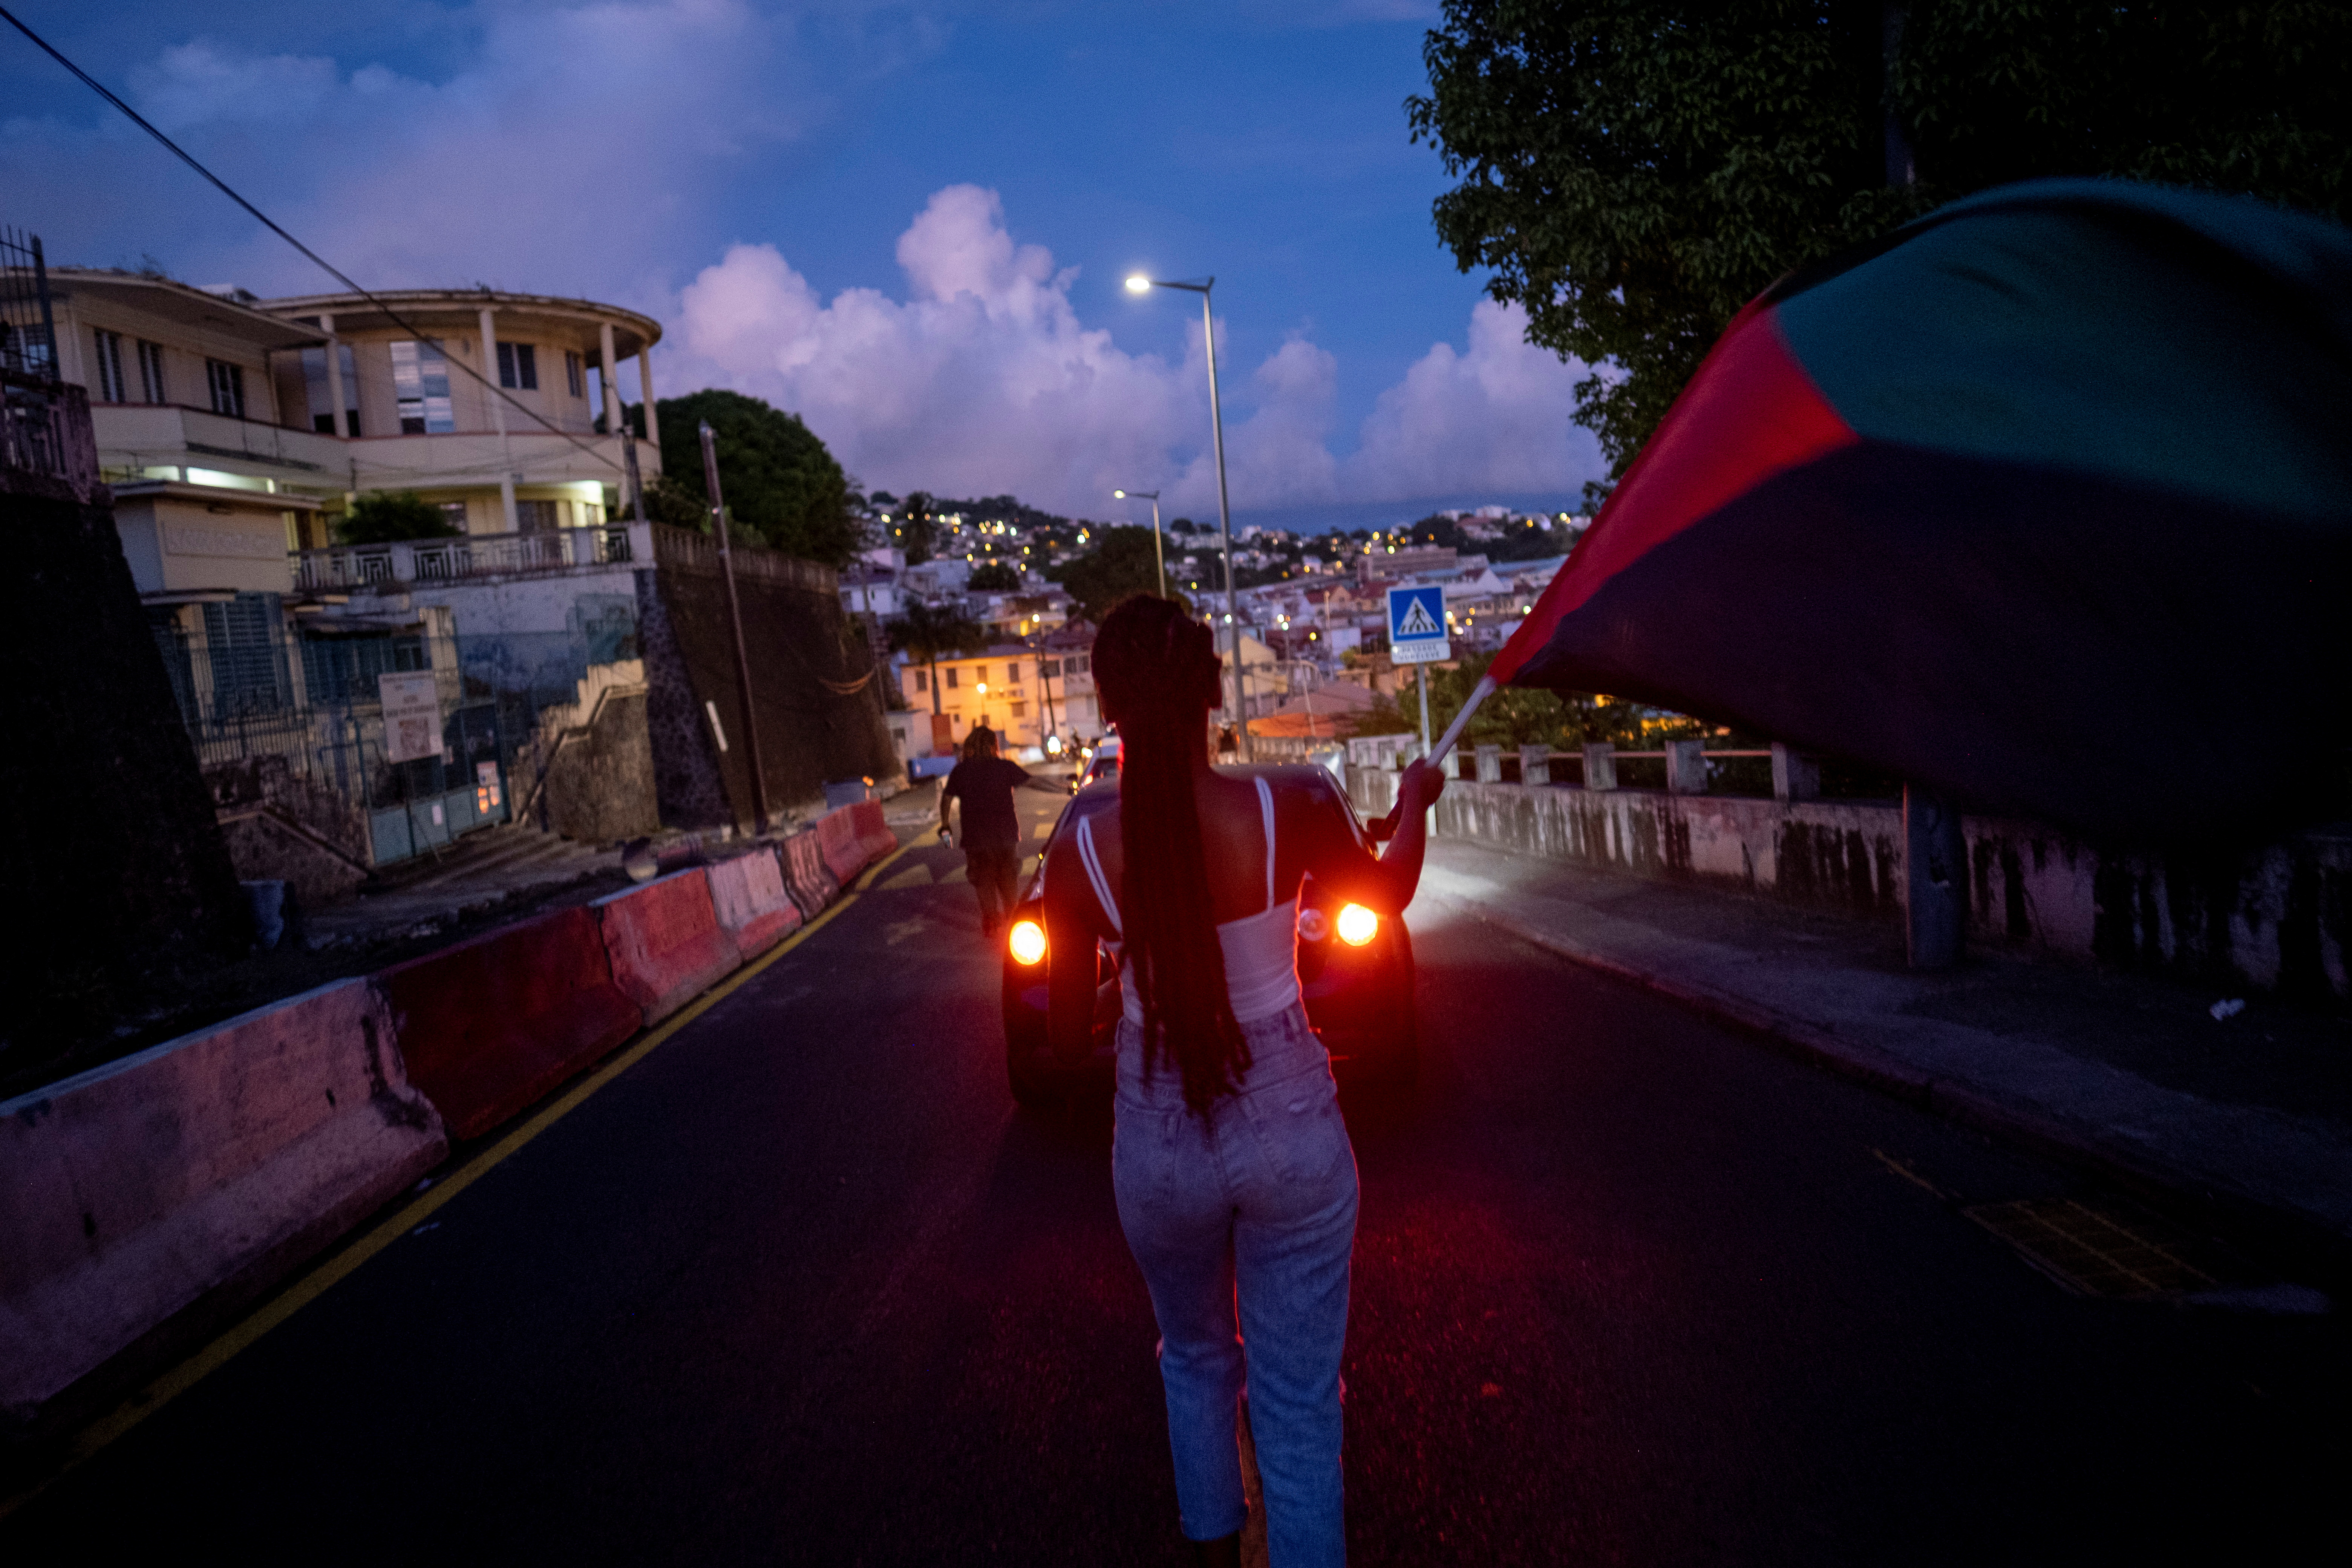 People participate in a peaceful protest against the government's coronavirus disease (COVID-19) protocols through downtown Fort de France after the unrest triggered by these curbs, which have already rocked the nearby island of Guadeloupe, in Fort-De-France, Martinique November 28, 2021. REUTERS/Ricardo Arduengo